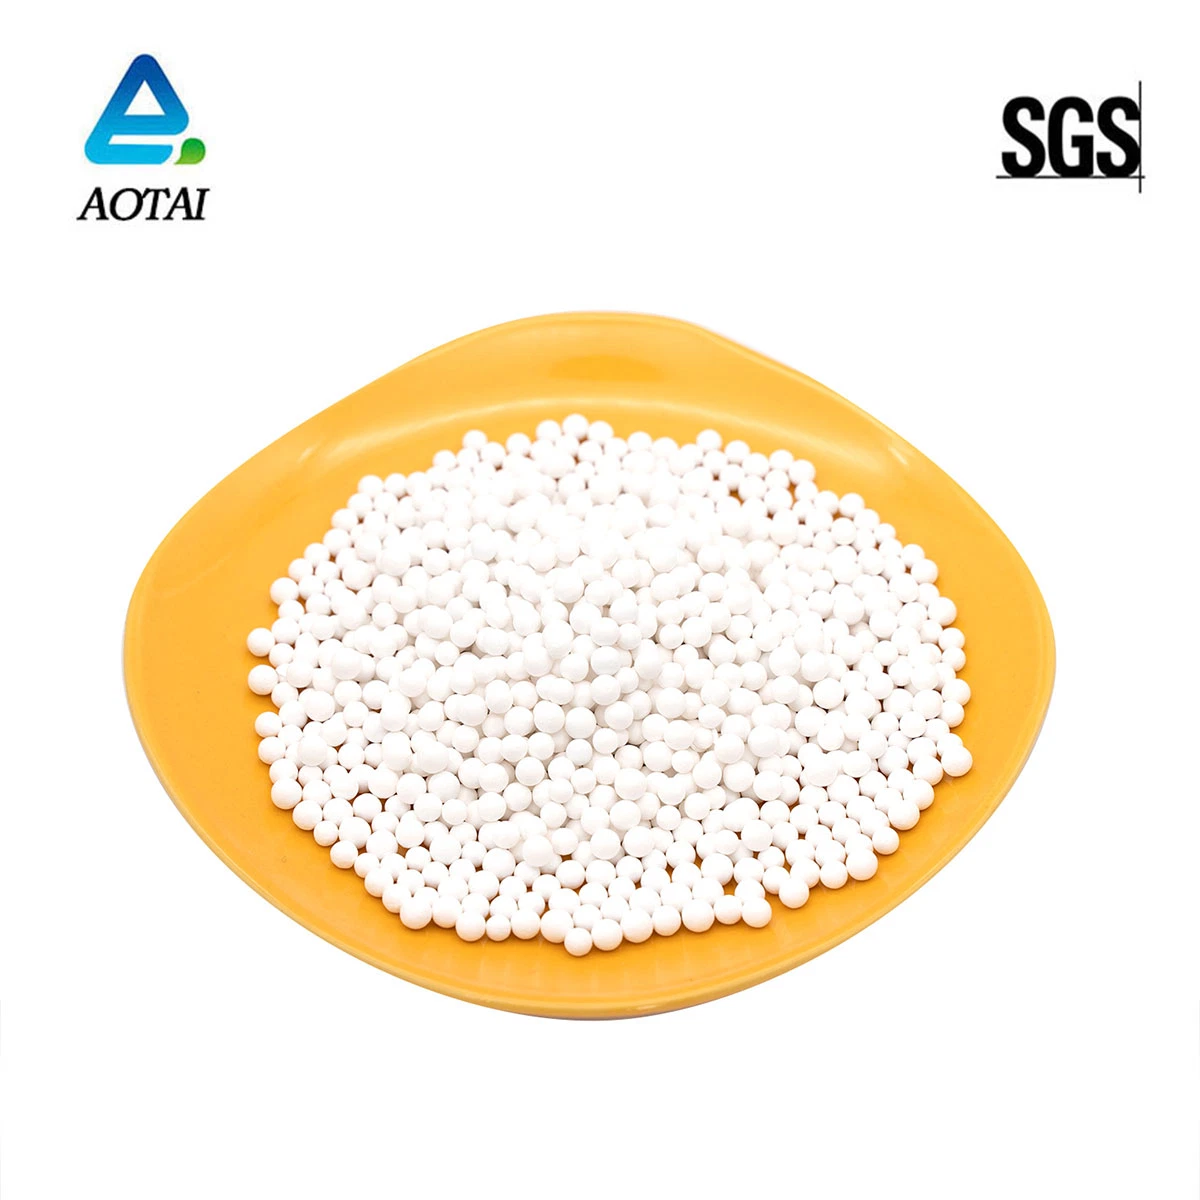 Highly Porous Activated Alumina with Ability to Absorb Gas, Vapor, Specific Liquids and Moisture